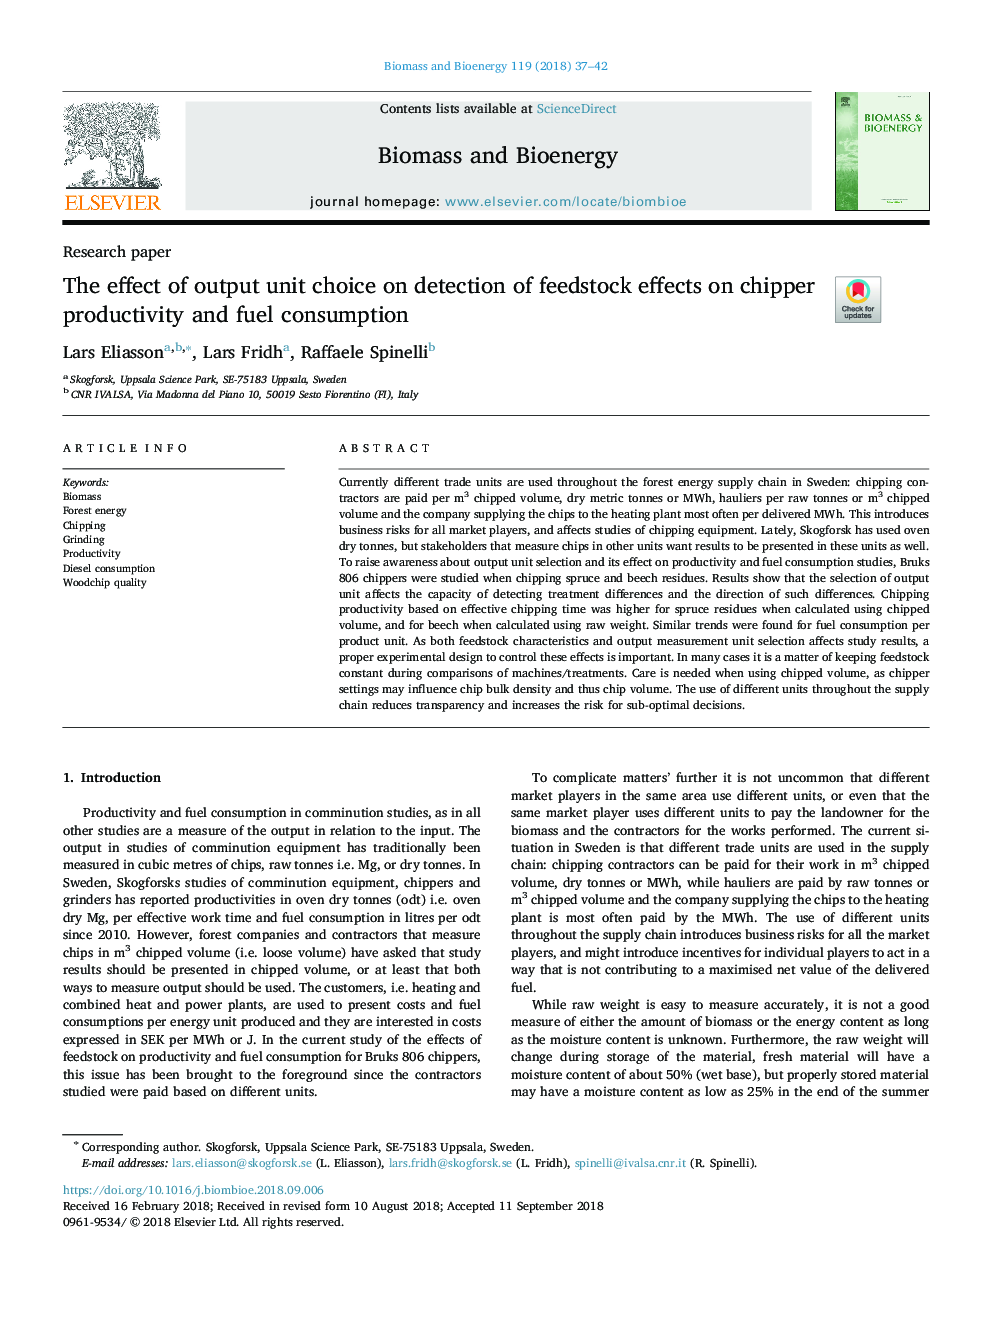 The effect of output unit choice on detection of feedstock effects on chipper productivity and fuel consumption